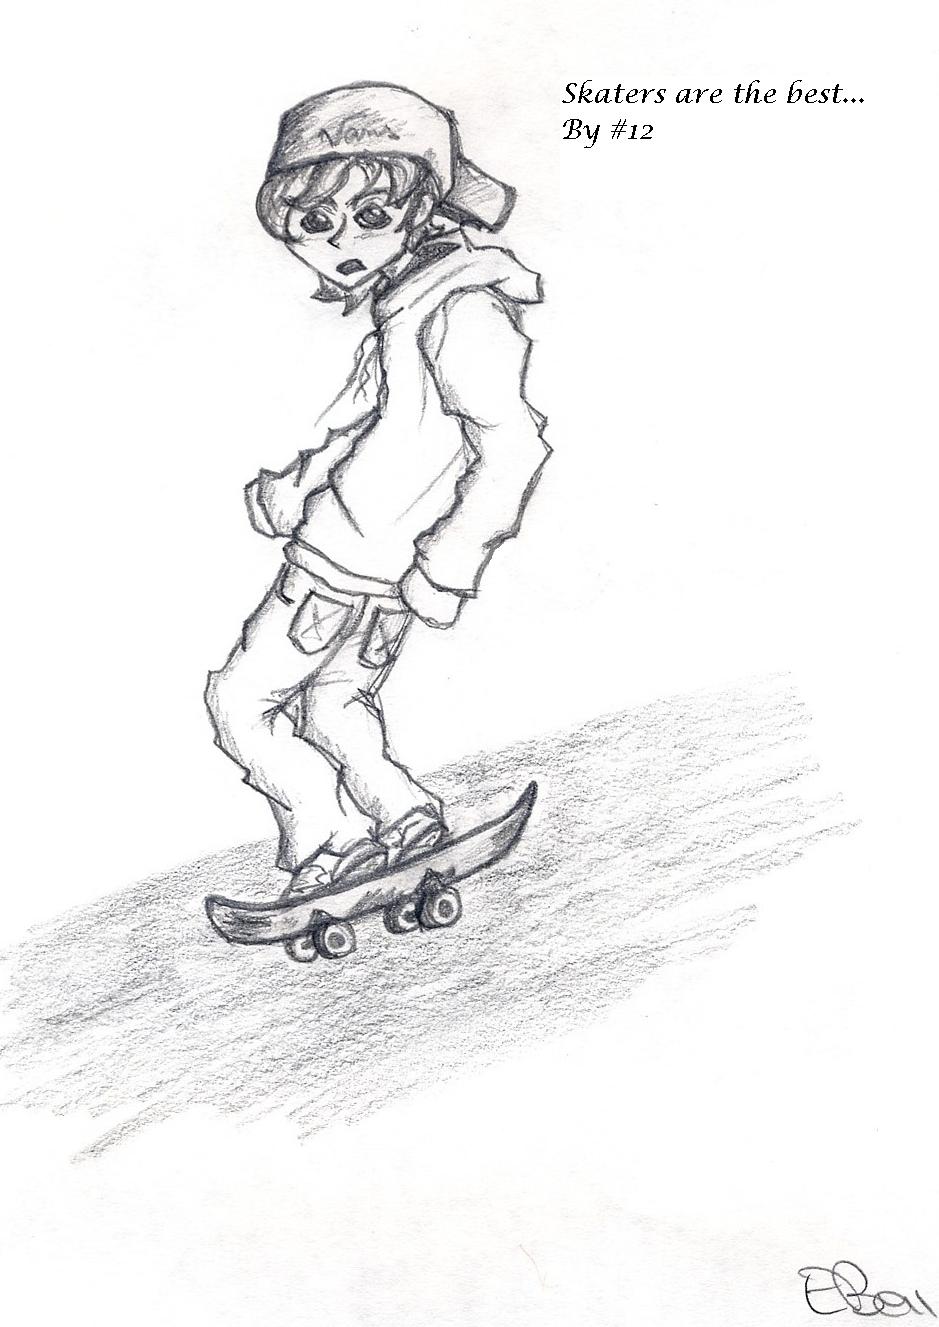 Sk8er by EB91